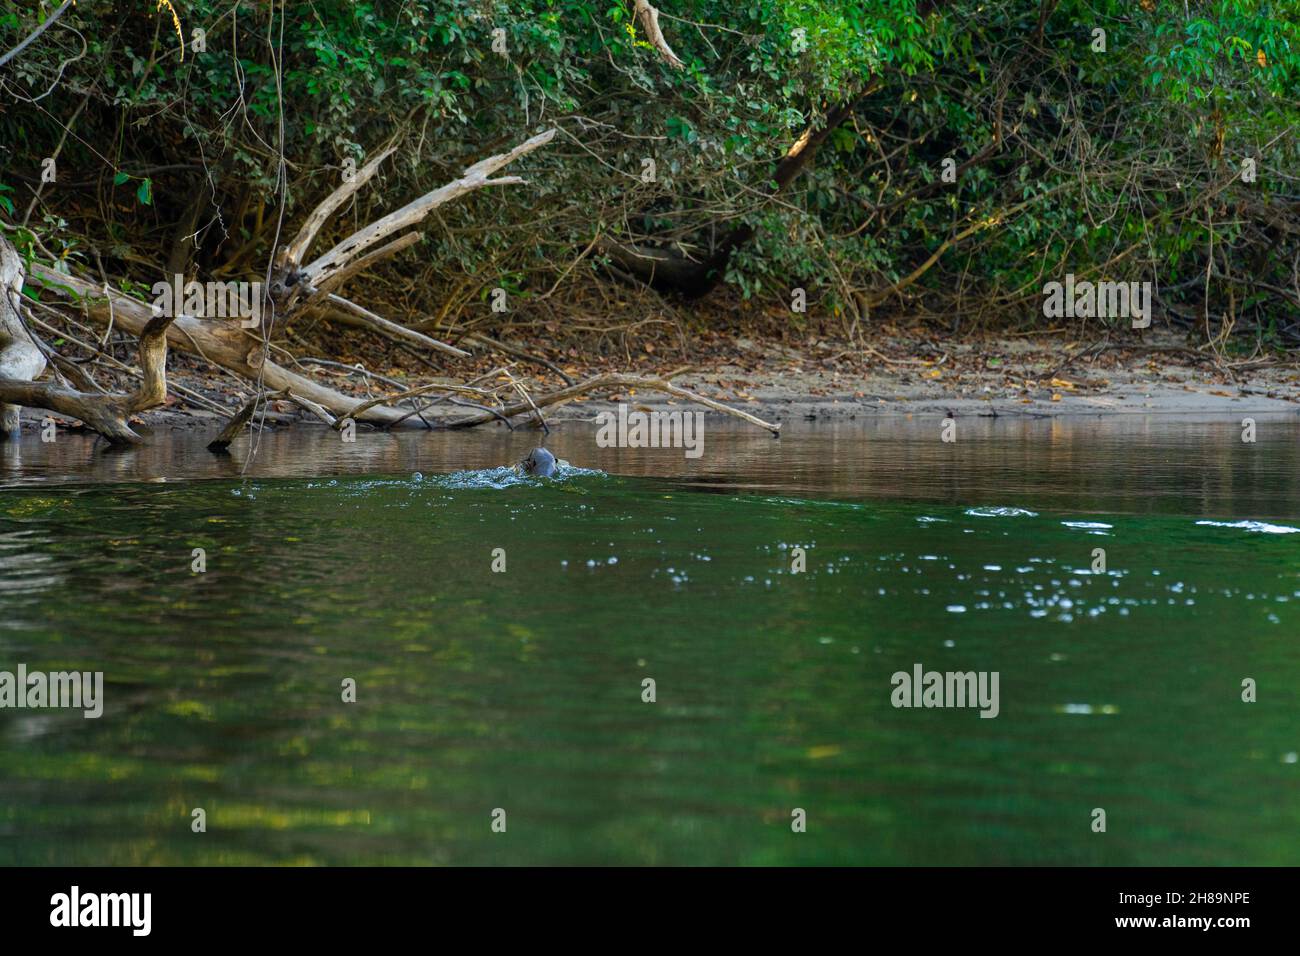 Giant Otters fishing in the Cristalino river in the Mato Grosso state portion of the Amazon Stock Photo